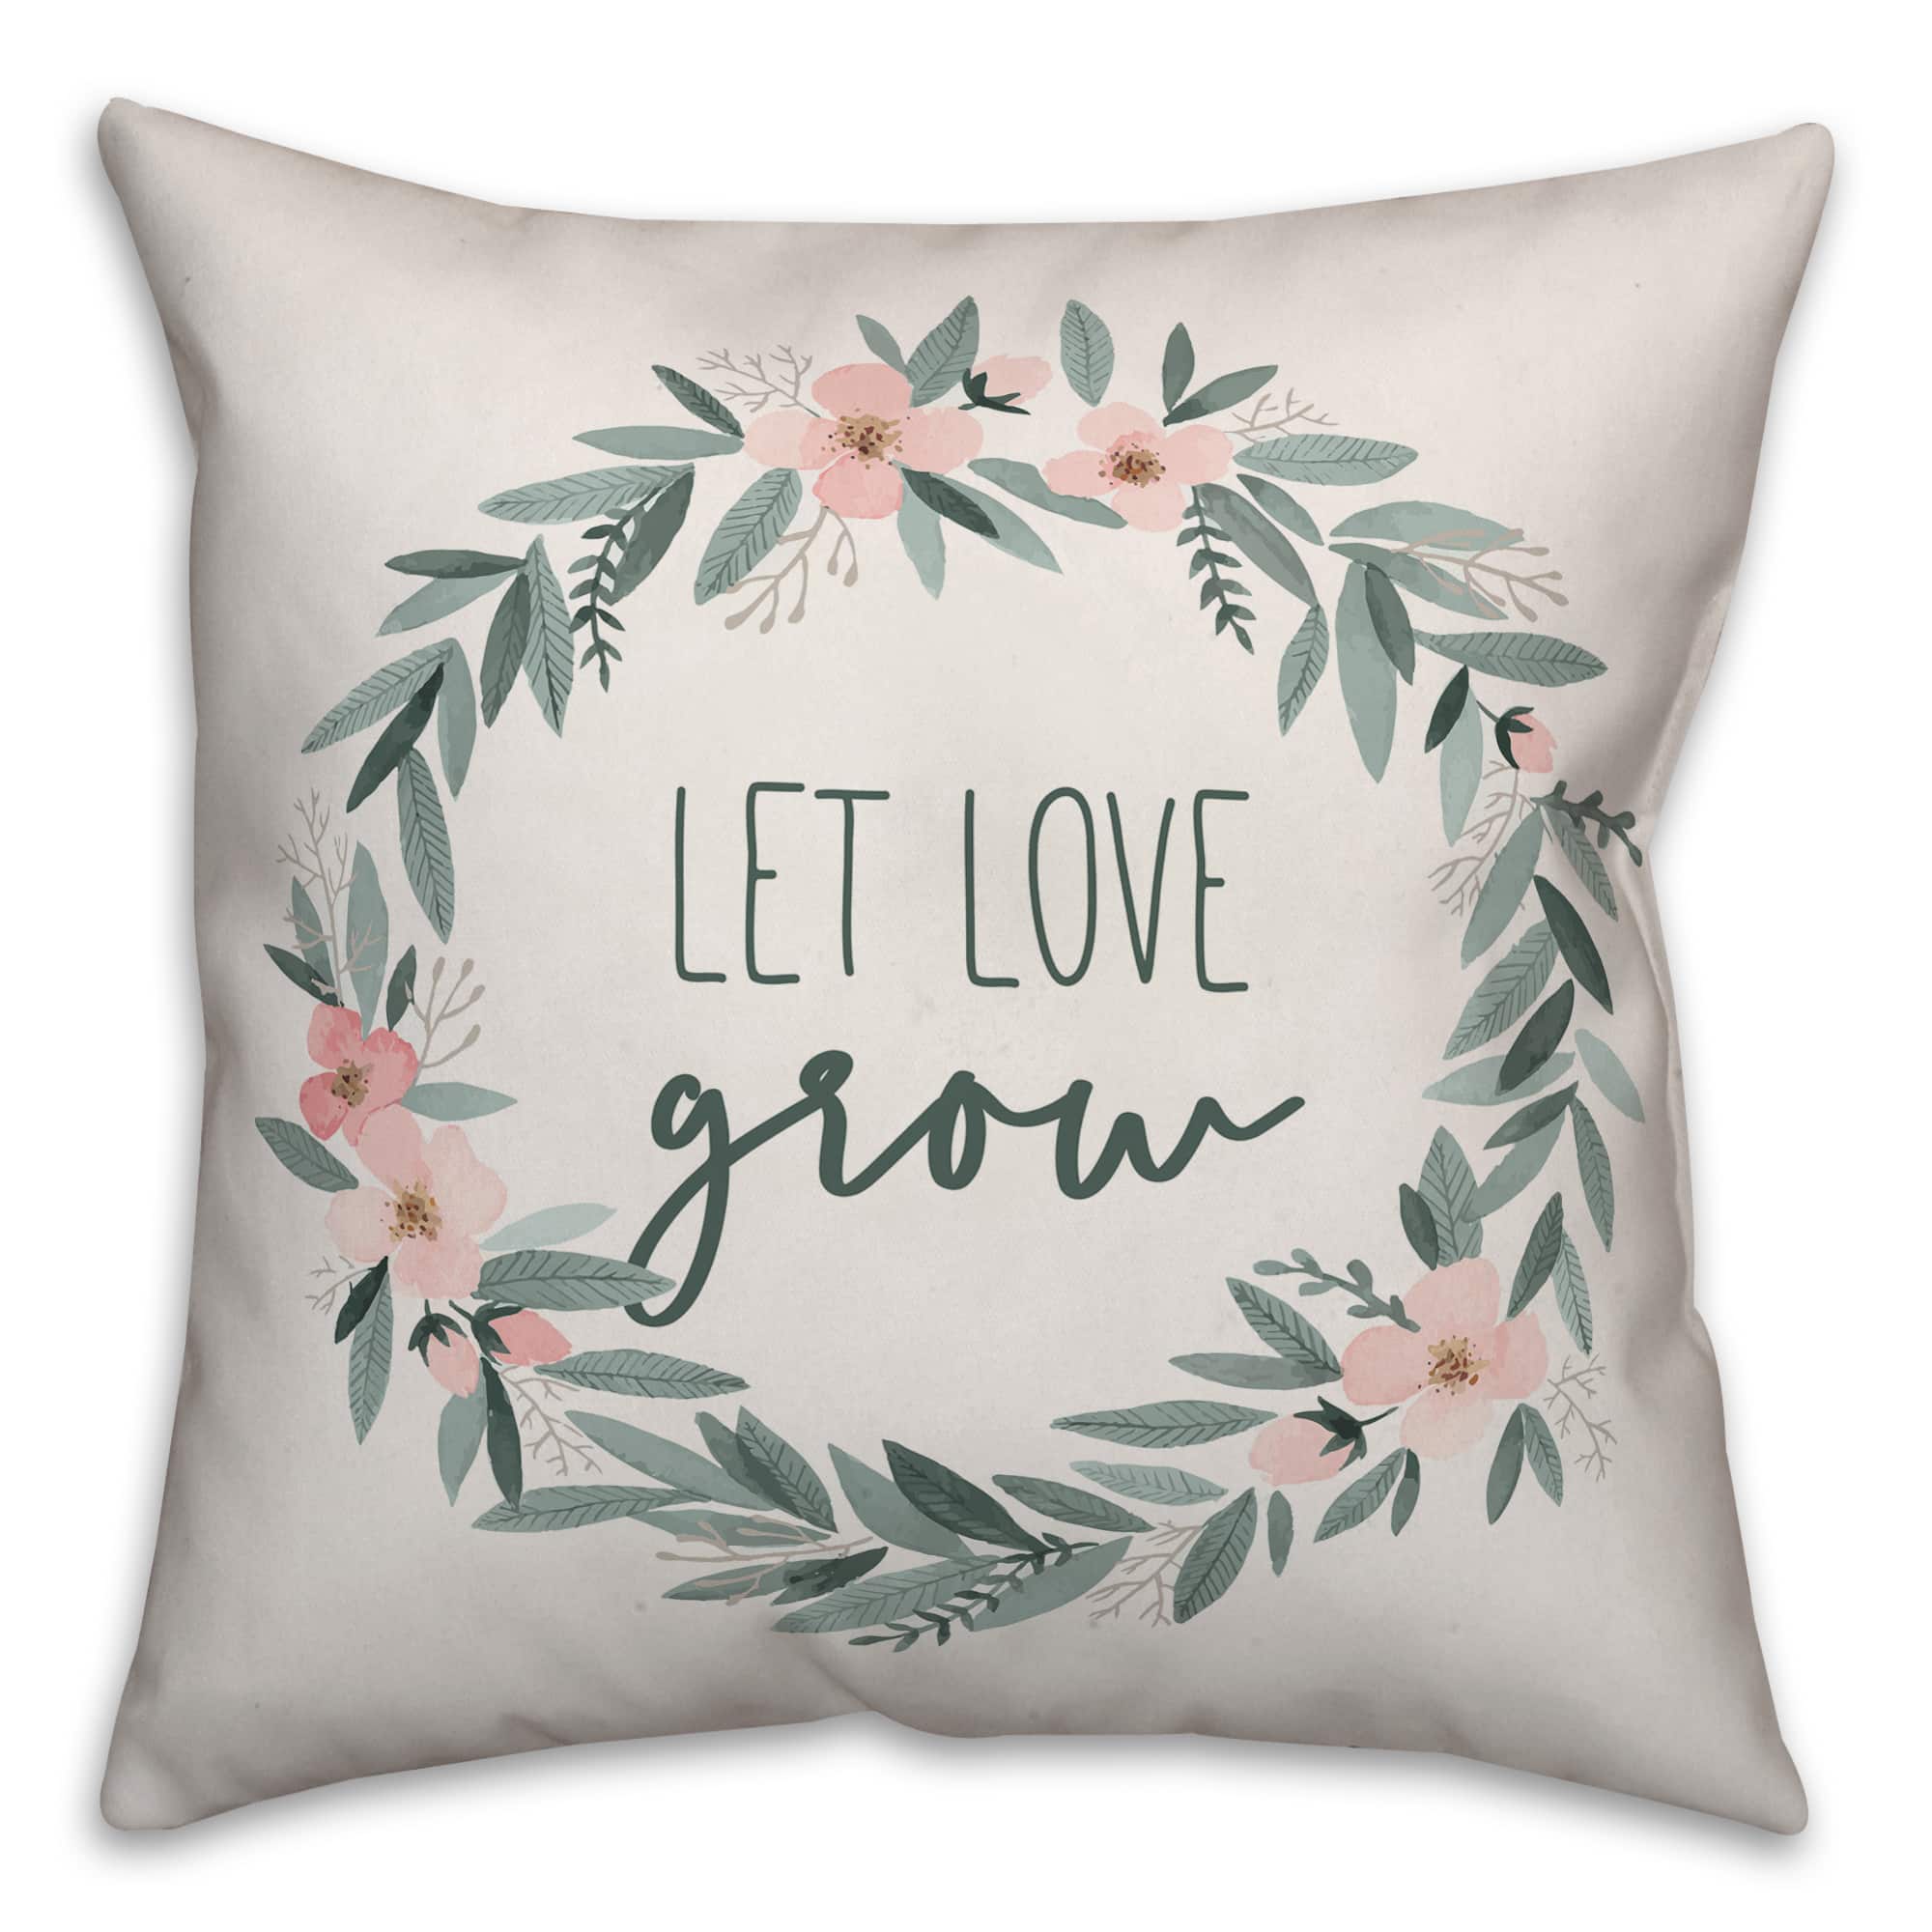 Purchase the Let Love Grow Throw Pillow at Michaels